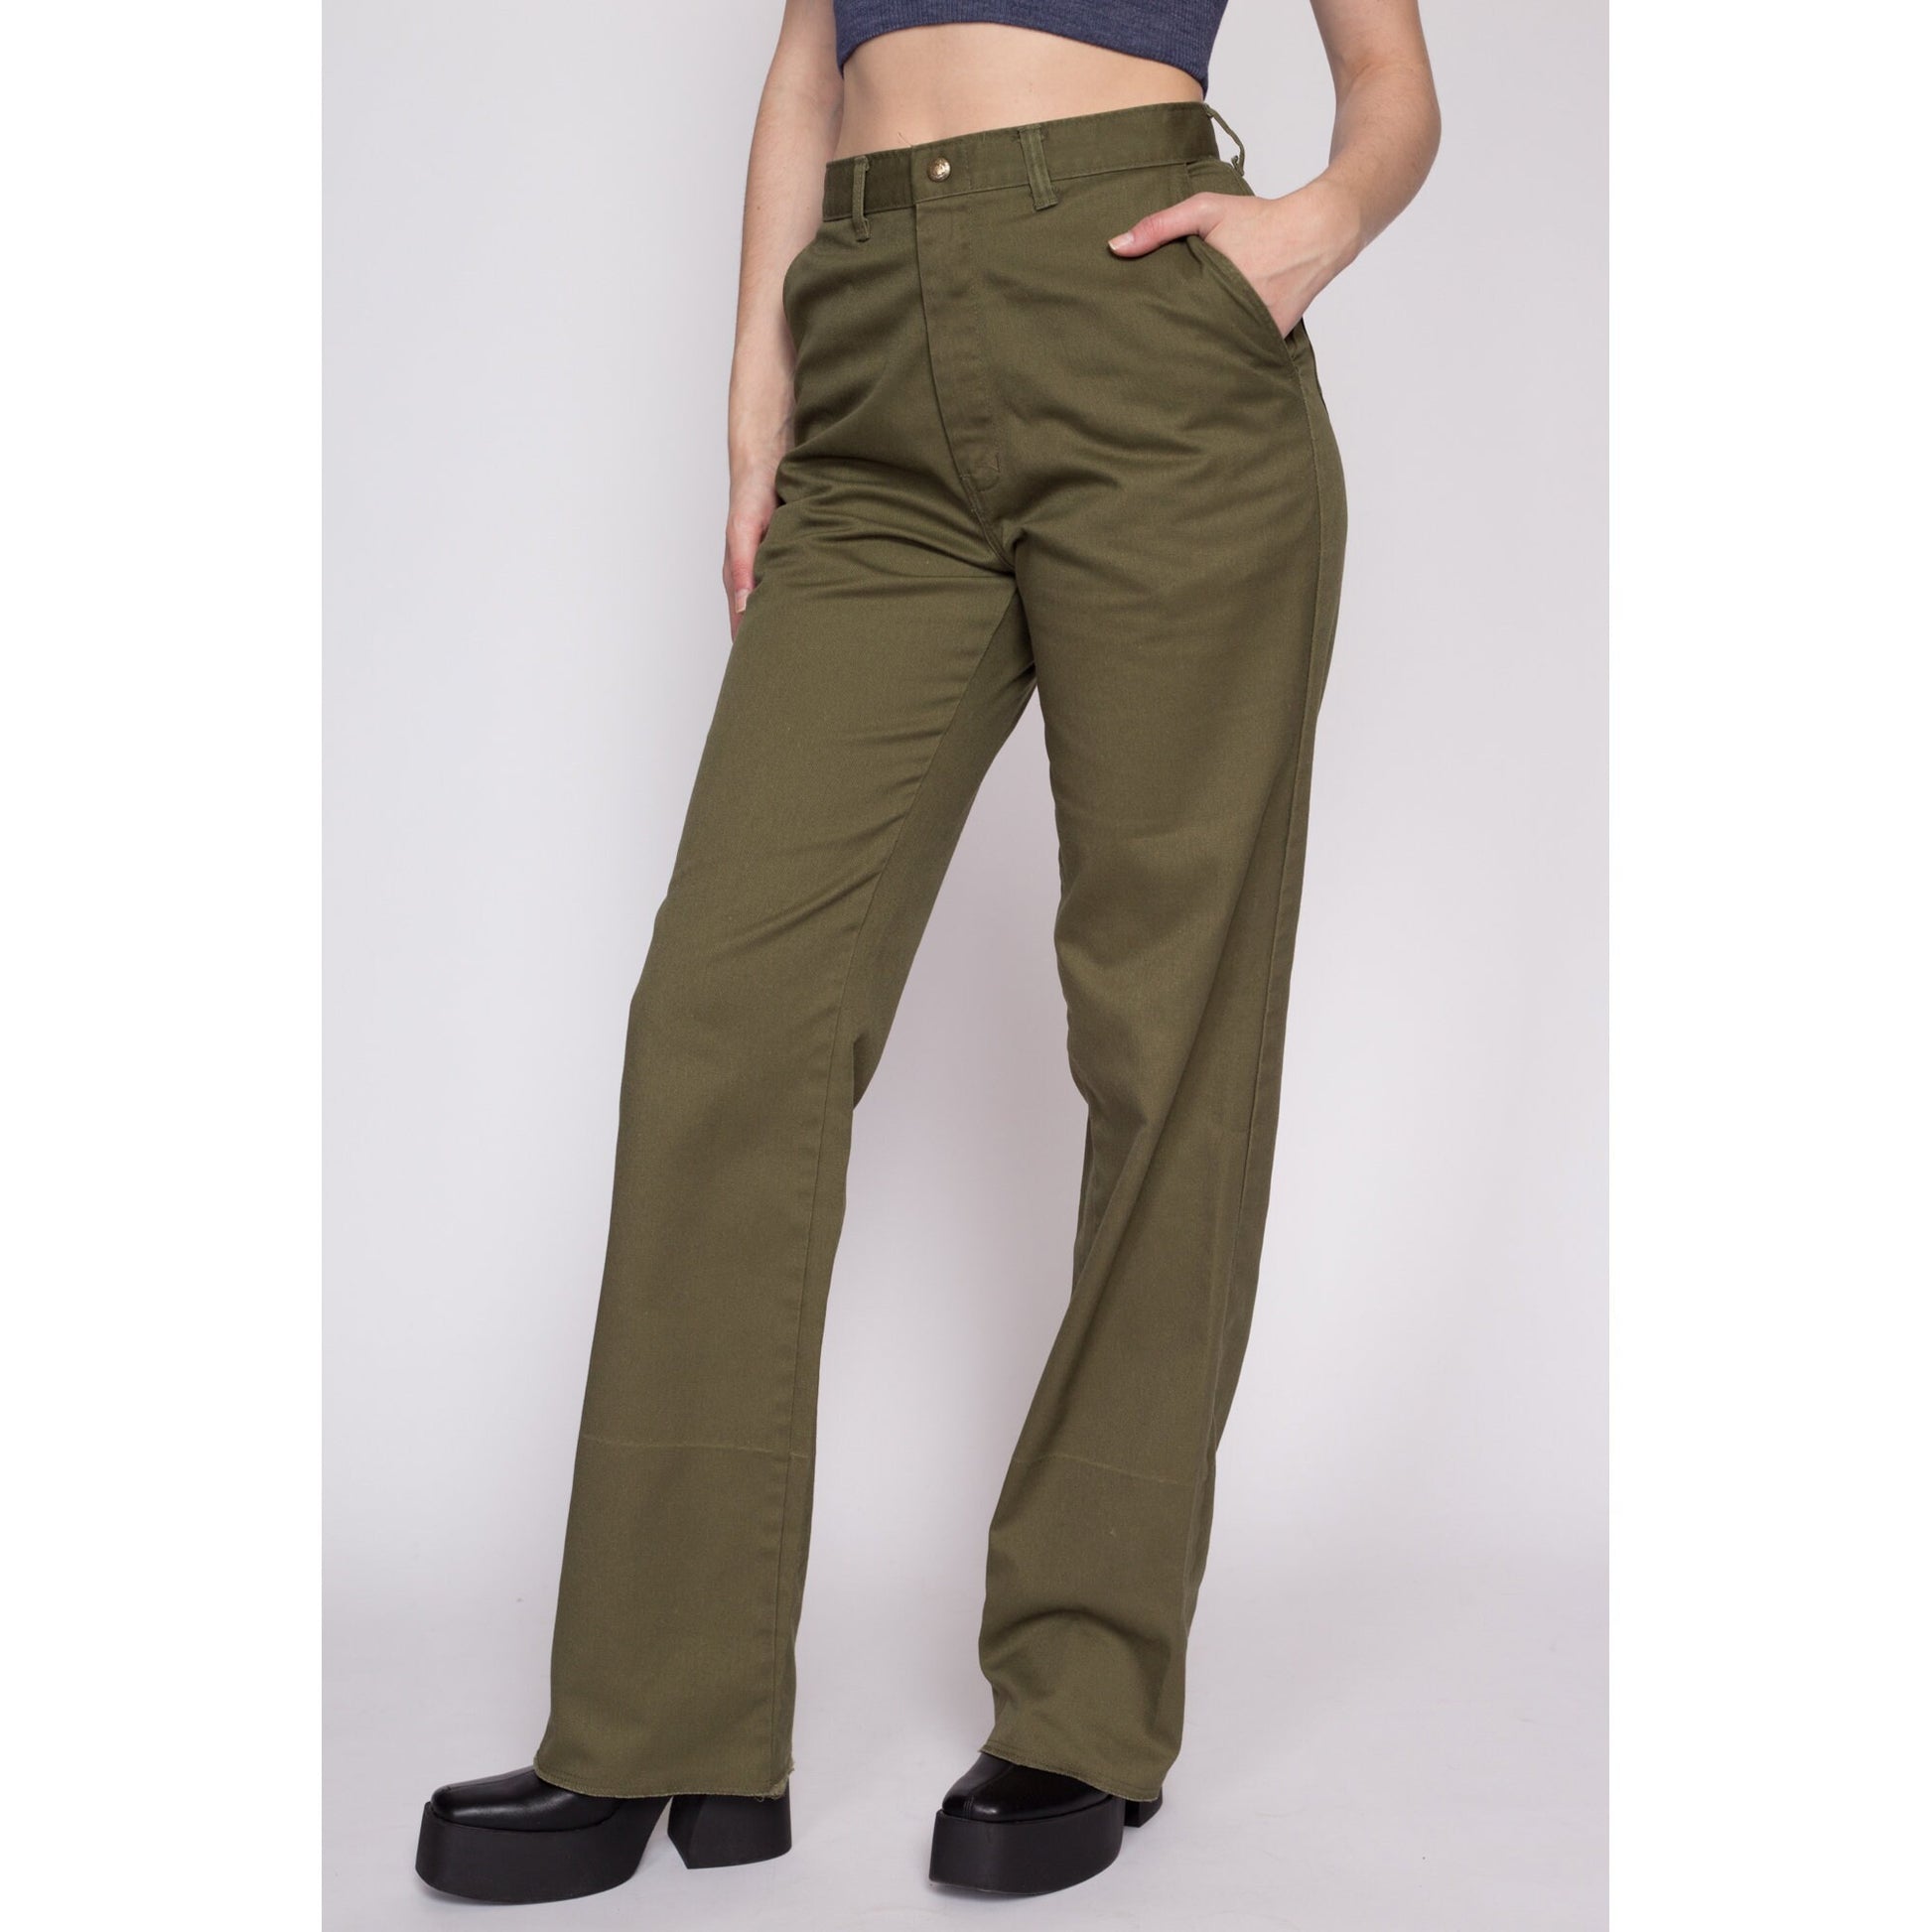 70s Boy Scout Uniform Pants - Men's Small, Women's Medium, 28.5" | Vintage Olive Green High Waisted Straight Leg Utility Trousers